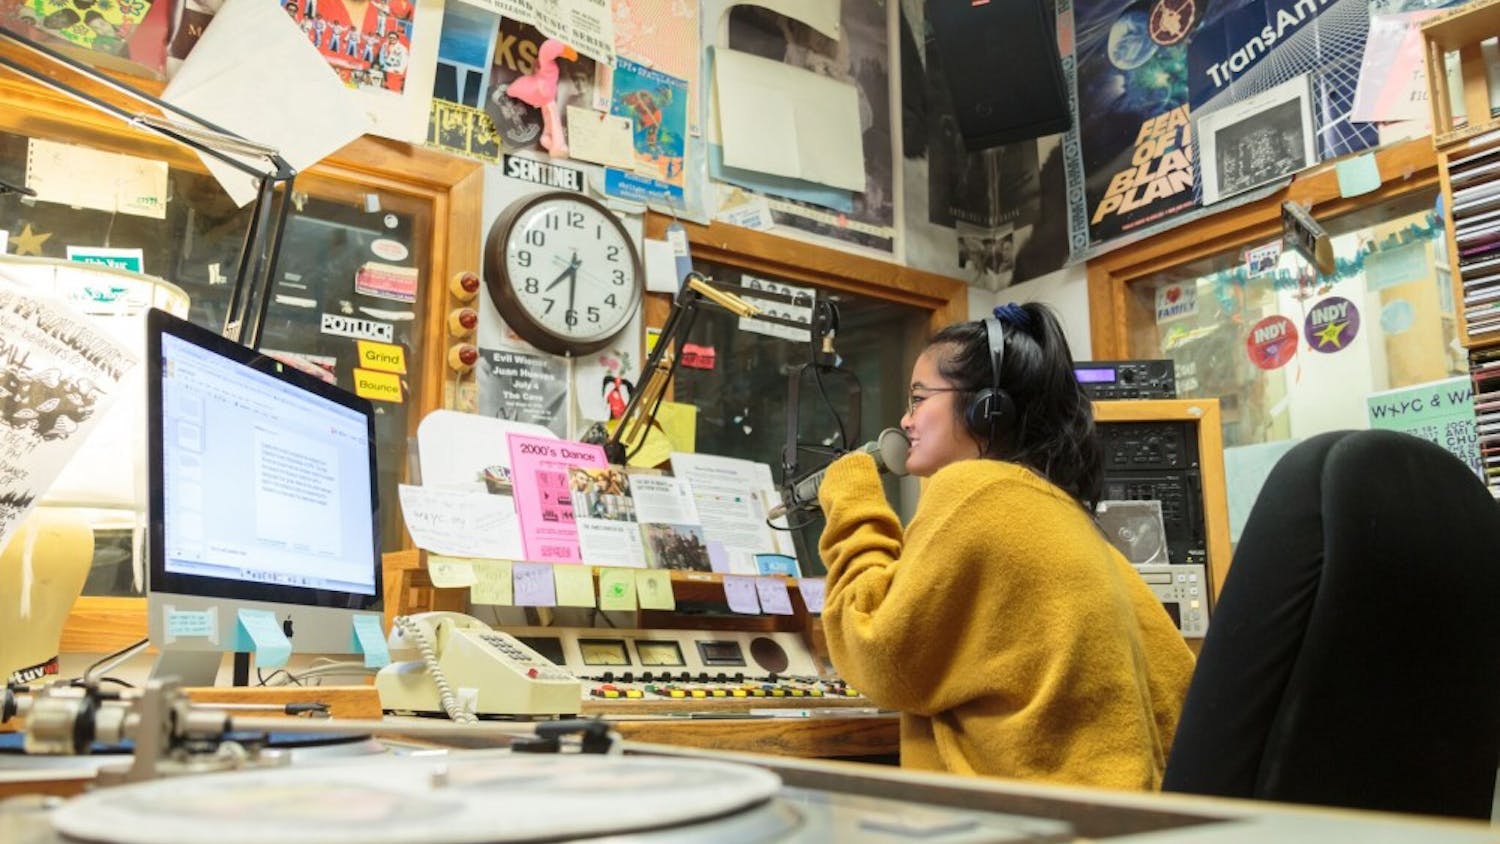 Sophomore psychology and statistics major Joanna Zhang works as a student DJ at UNC's WXYC.